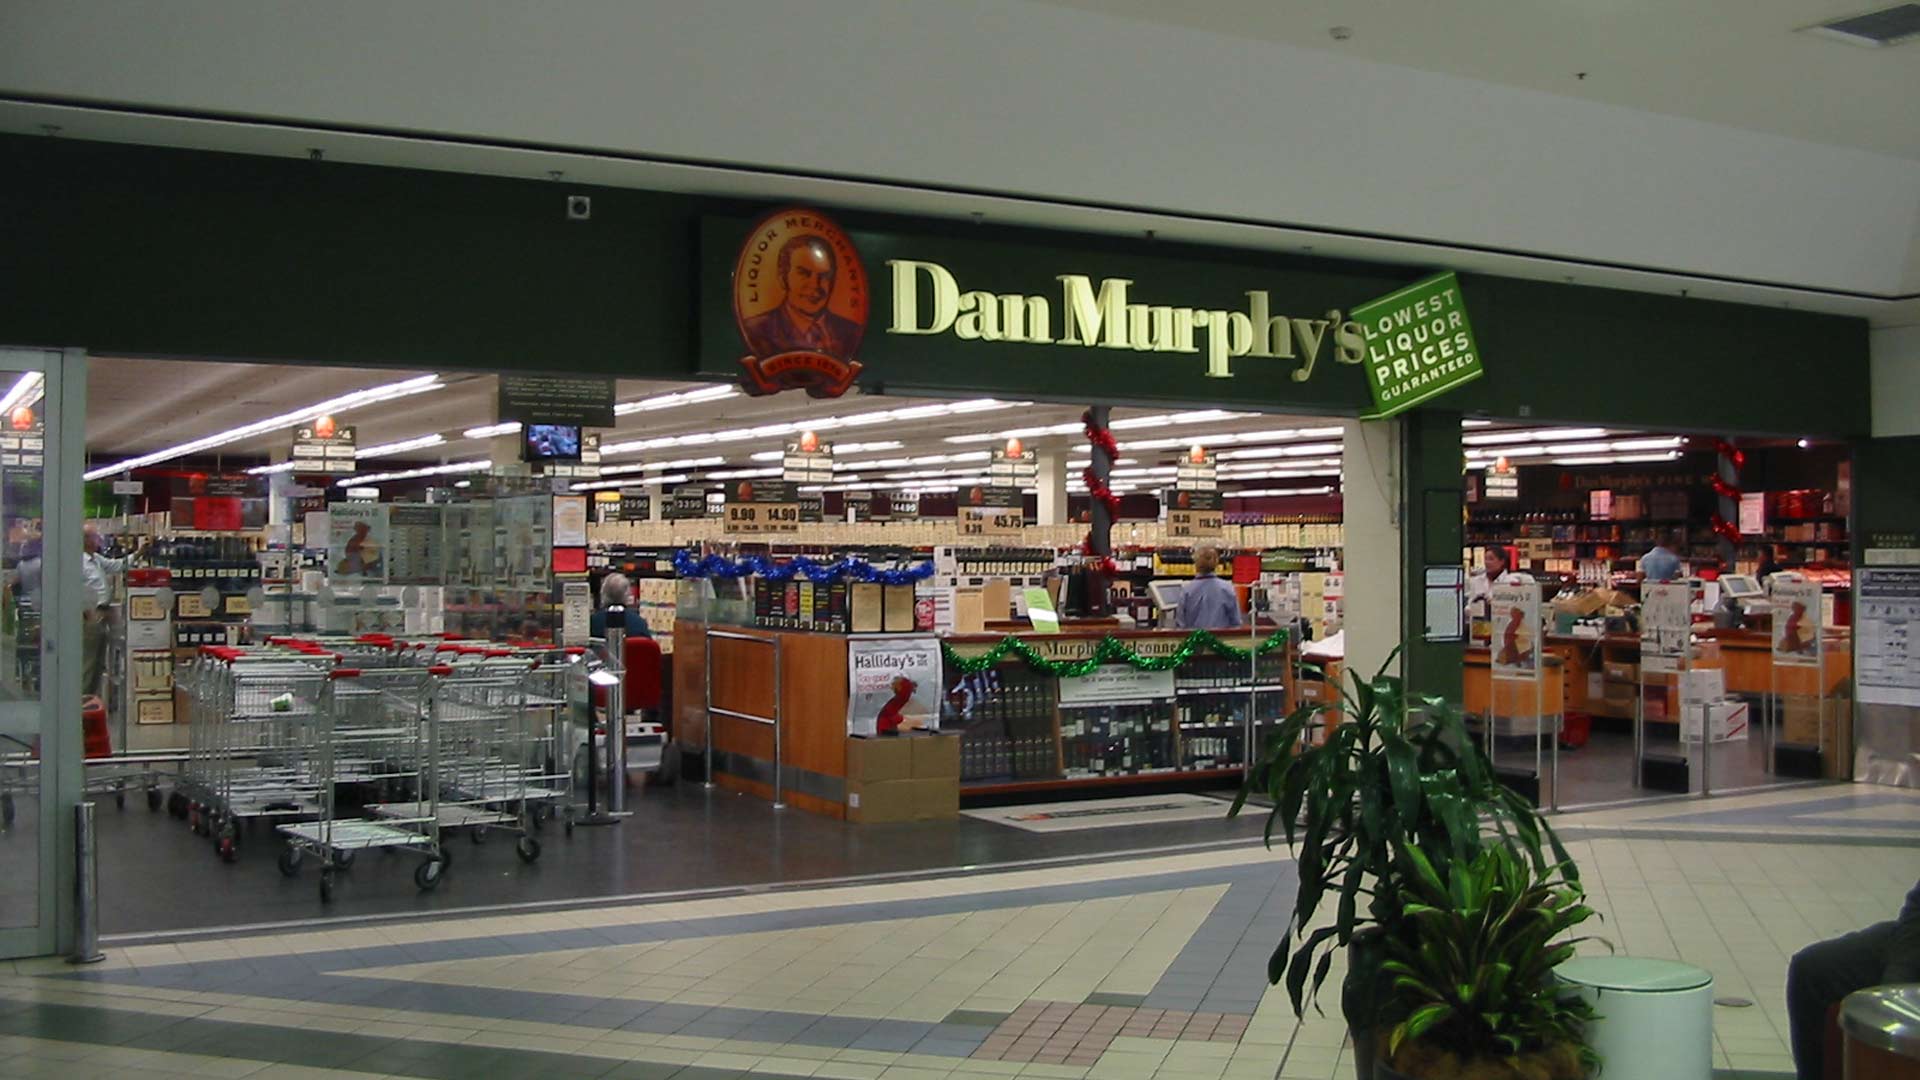 Dan Murphy's and BWS Have Introduced Limits on Alcohol to Discourage Hoarding